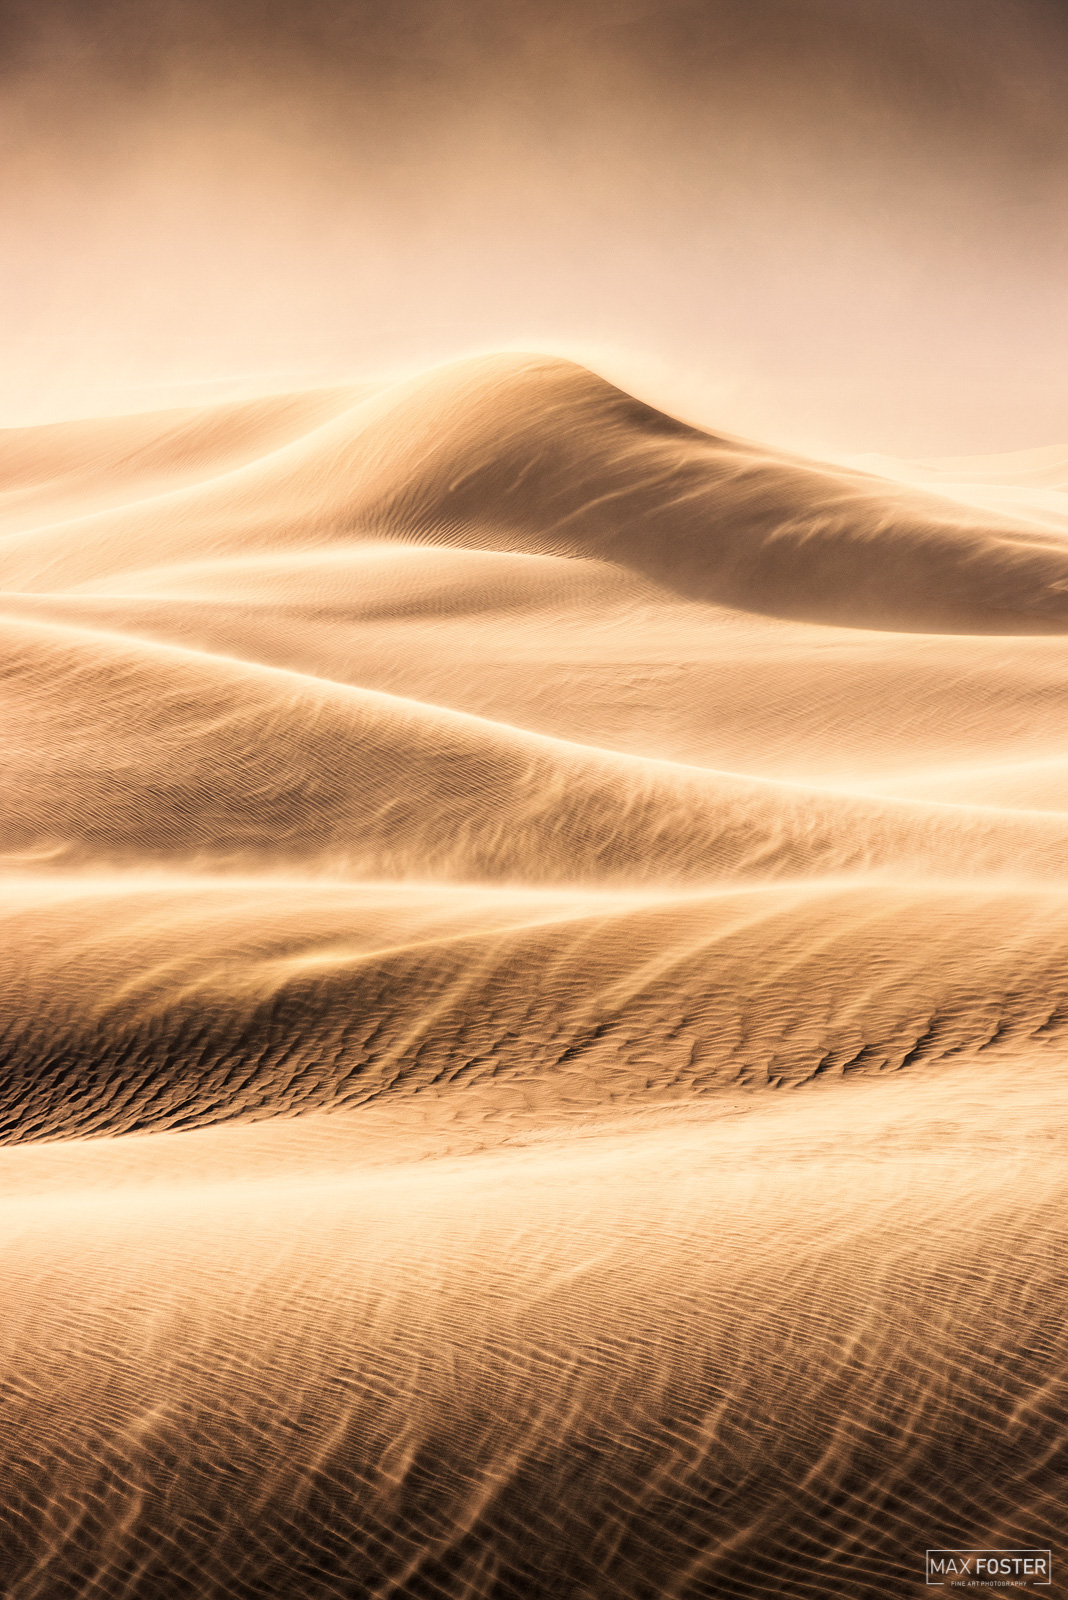 Elevate your space with Fury, Max Foster's limited edition photography print of sand dunes in Death Valley National Park from...